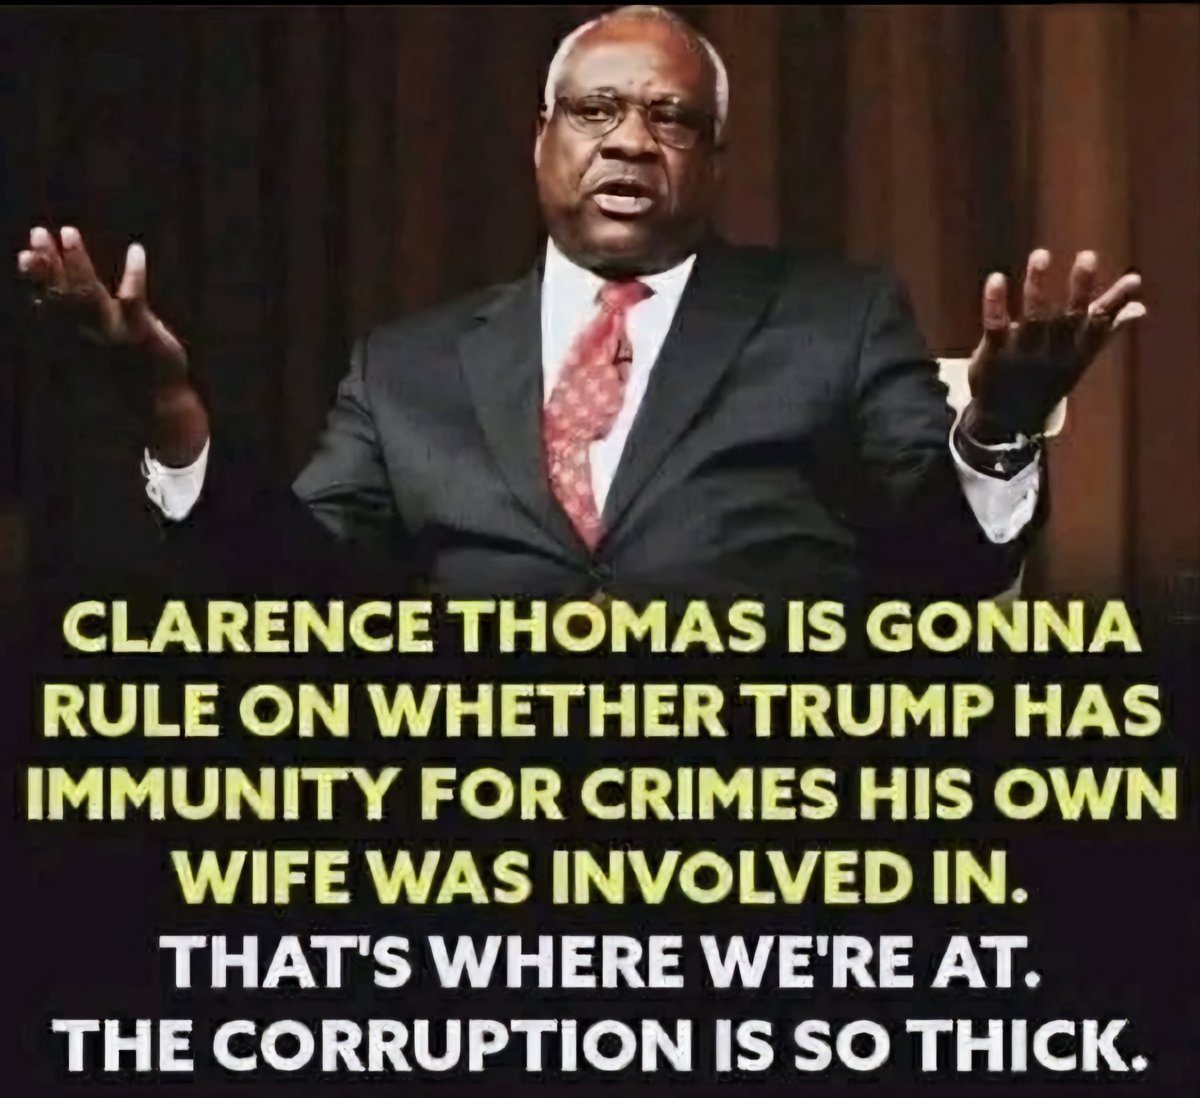 Clarence Thomas' refusal to recuse himself is a stain on the integrity of the Supreme Court. #JusticeMatters